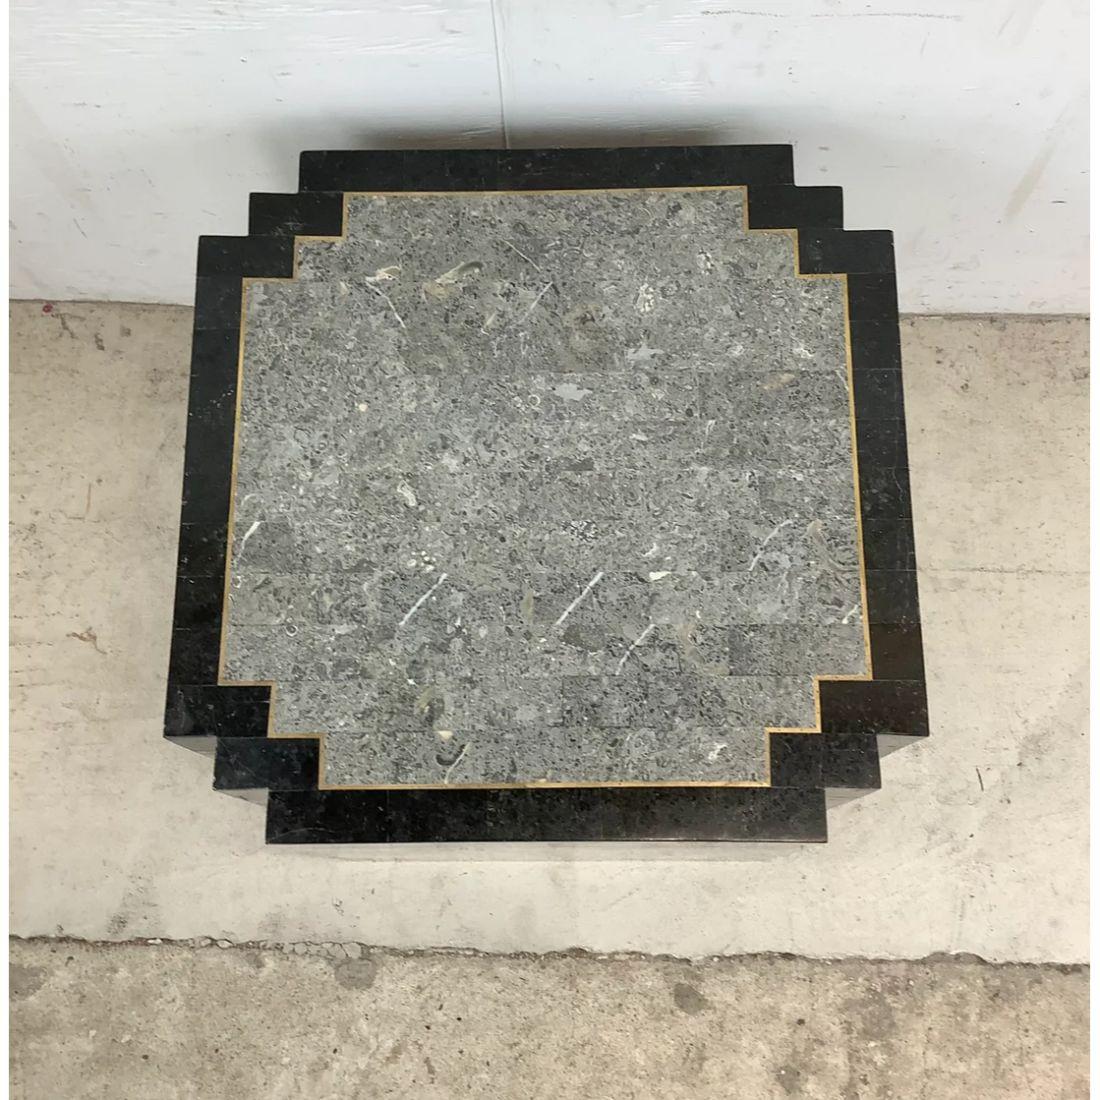 This vintage modern side table makes an eye catching end table or lamp table in any setting, its unique shape, low-profile, and tessellated stone finish add to the striking appeal of this Maitland-Smith style table. Mixed tone stone finish with